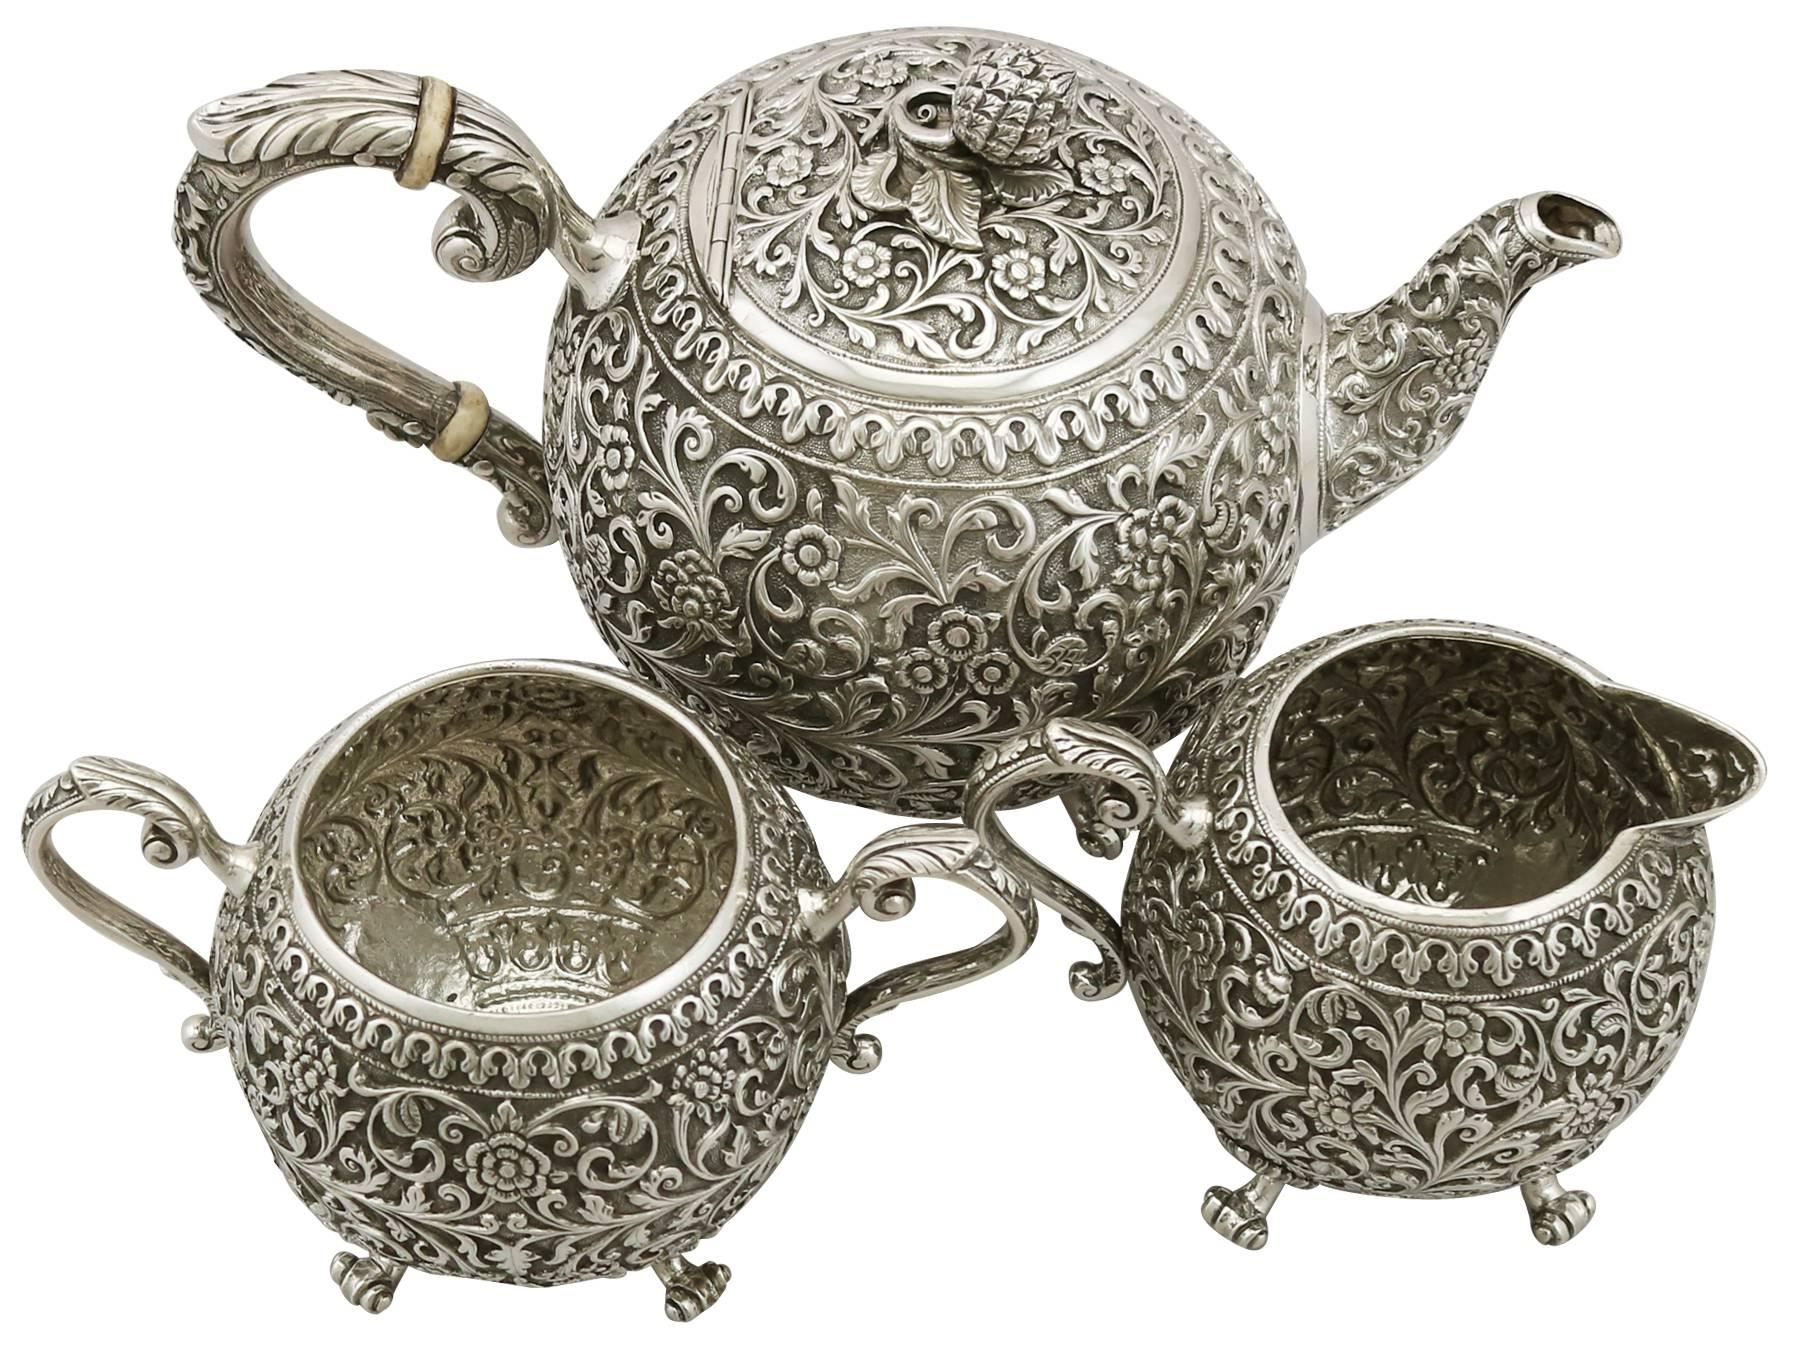 A exceptional, fine and impressive antique Indian silver three-piece tea service made by Oomersee Mawjee & Sons; an addition to our diverse silver teaware collection.

This exceptional antique Indian silver tea set/set consists of a teapot, cream